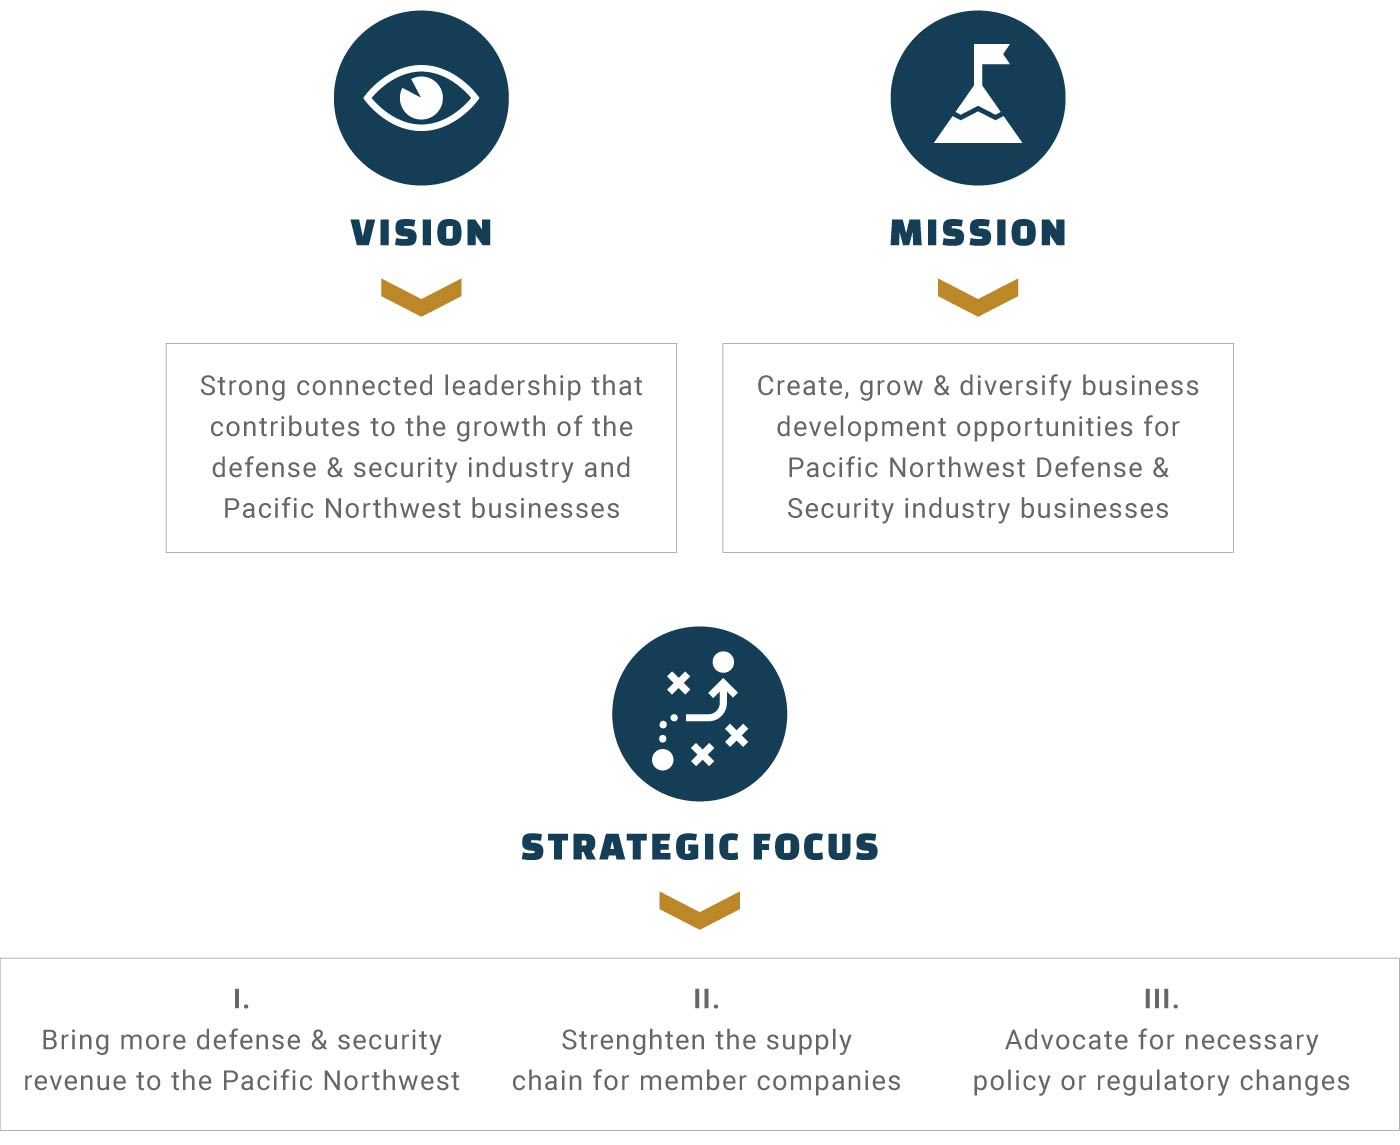 pndc about mission, vision and strategic focus